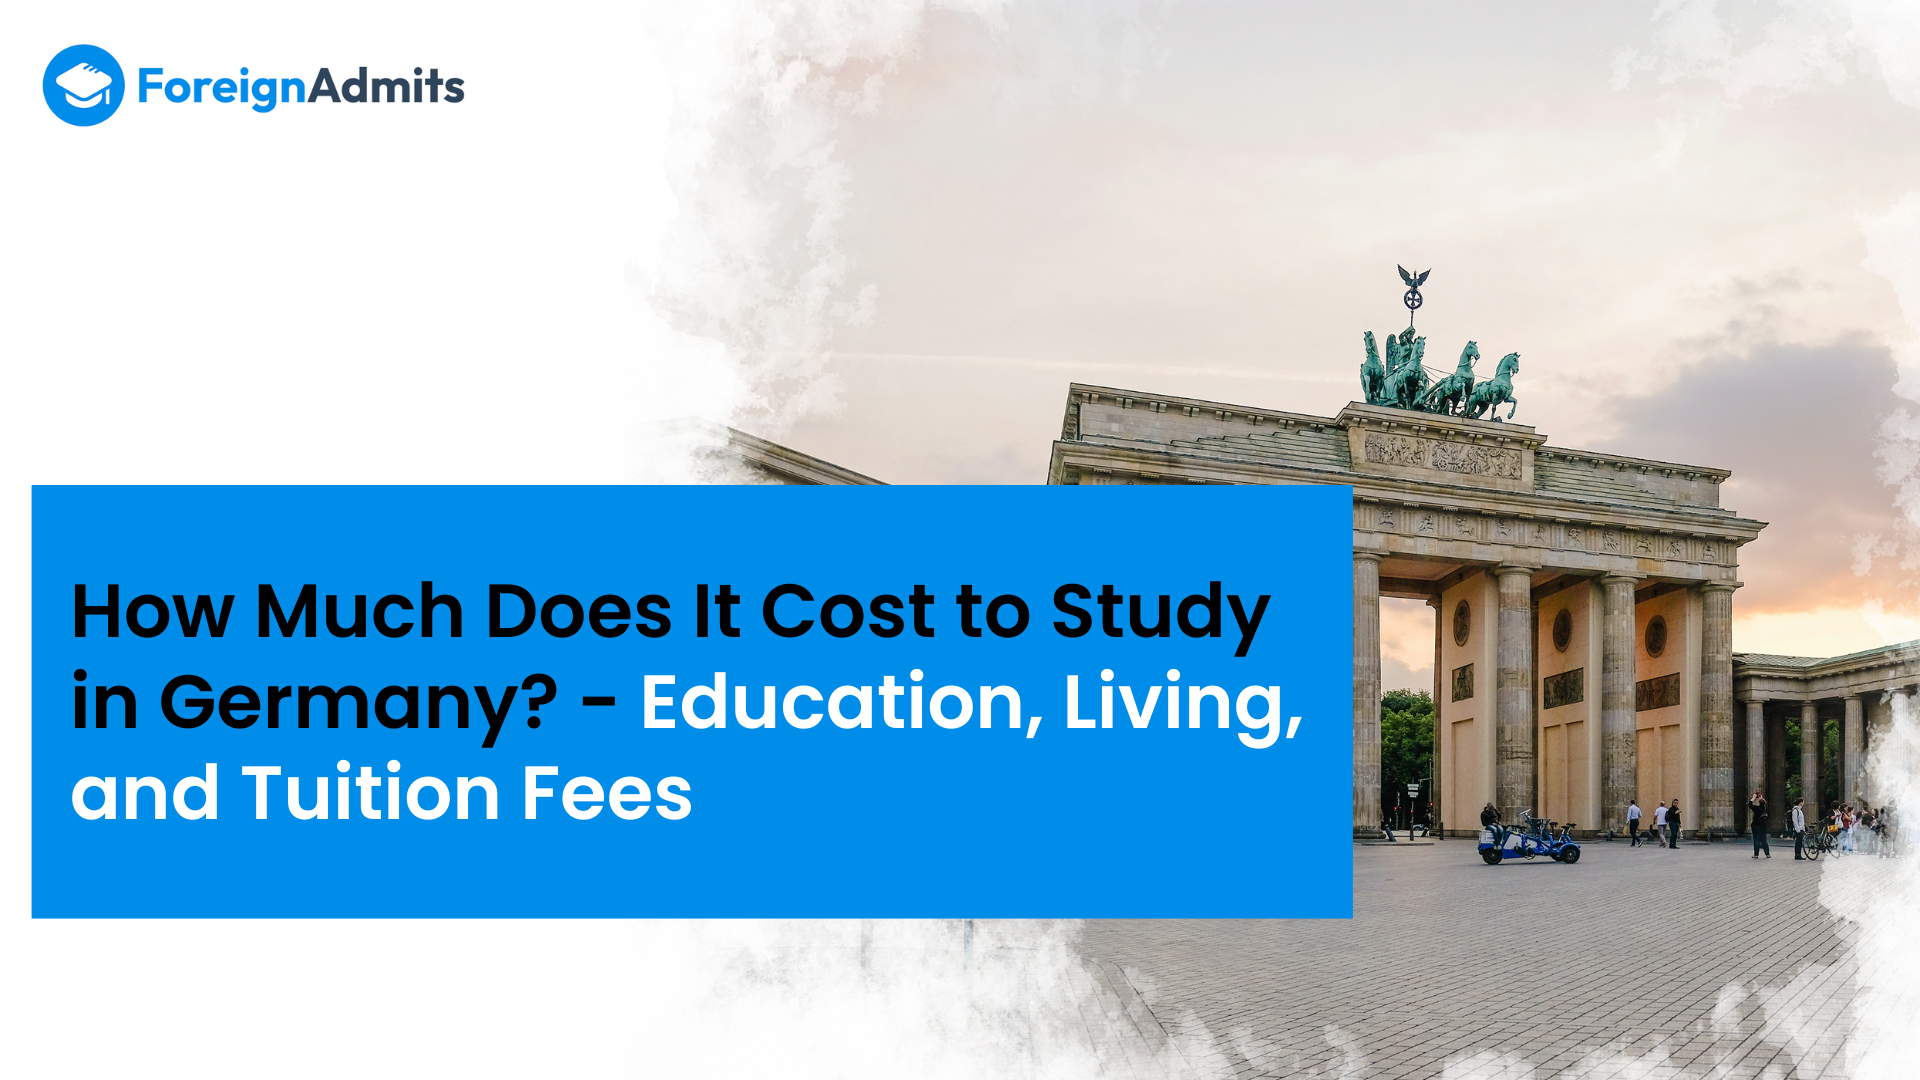 How Much Does It Cost to Study in Germany? – Education and Living Fees